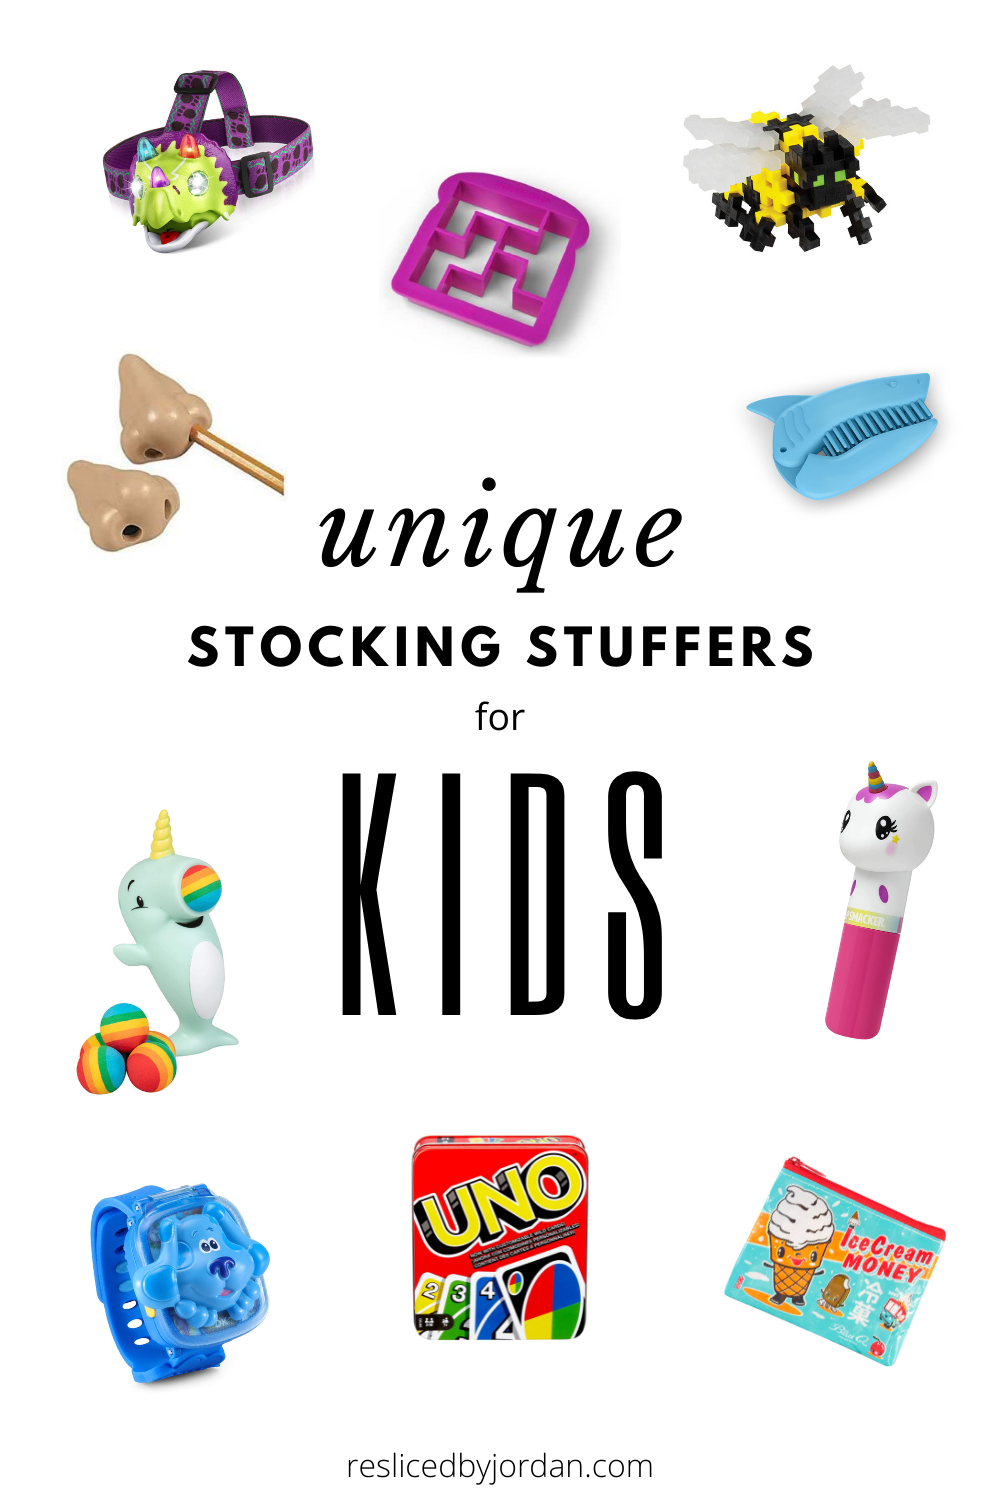 250+ Unique Stocking Stuffers For Kids (That Aren't Junk!)  Stocking  stuffers for kids, Unique stocking stuffers, Stocking stuffer gifts